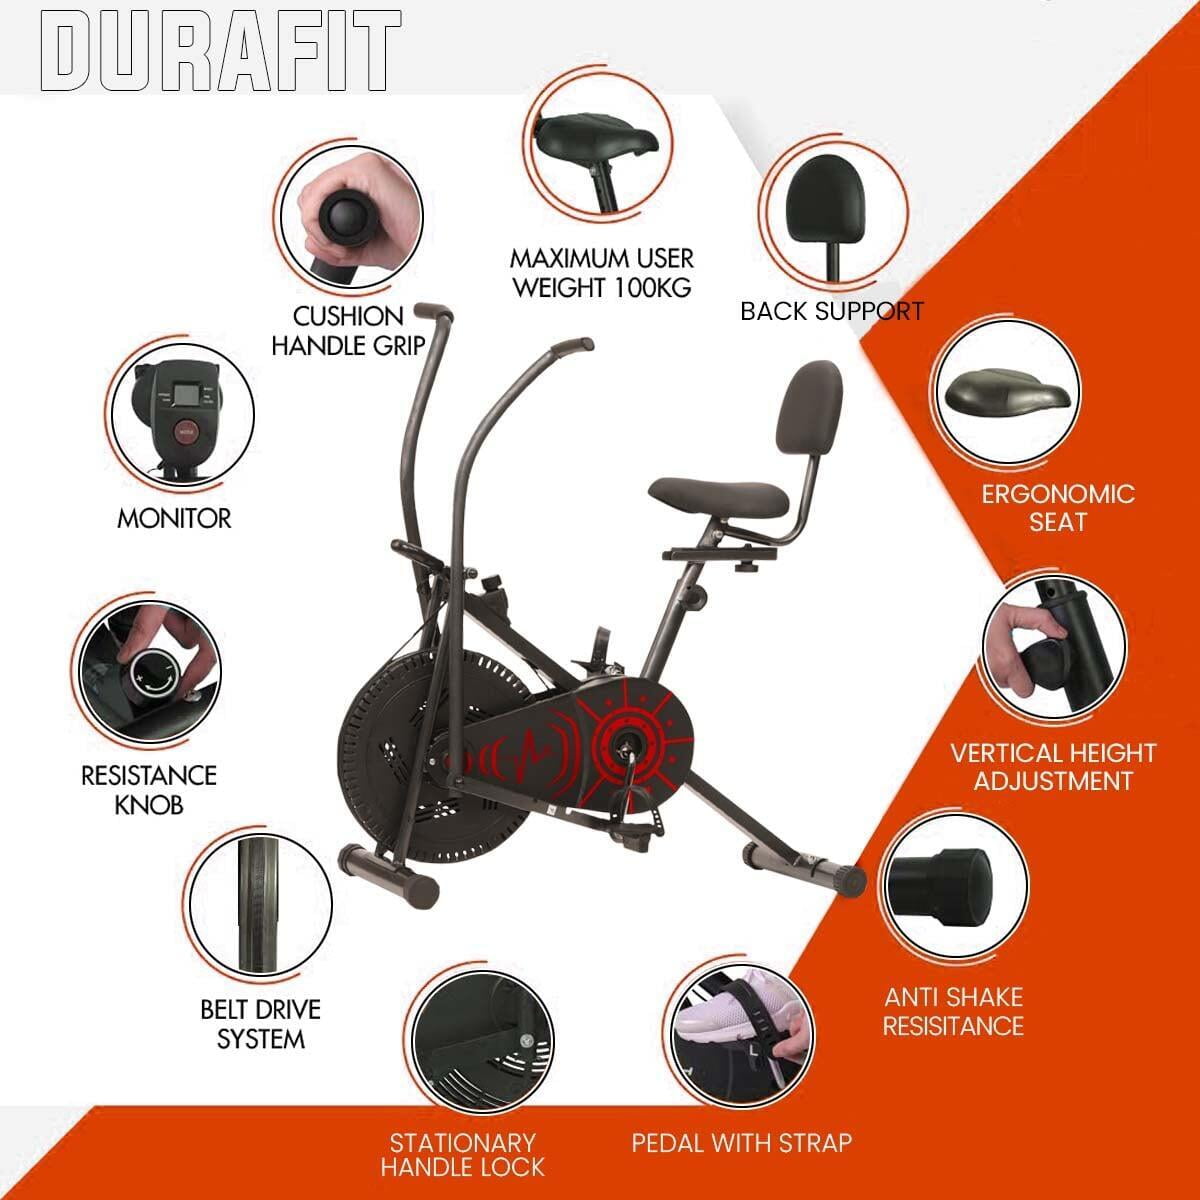 Durafit Air Bike Abr02 with multiple adjustment functions